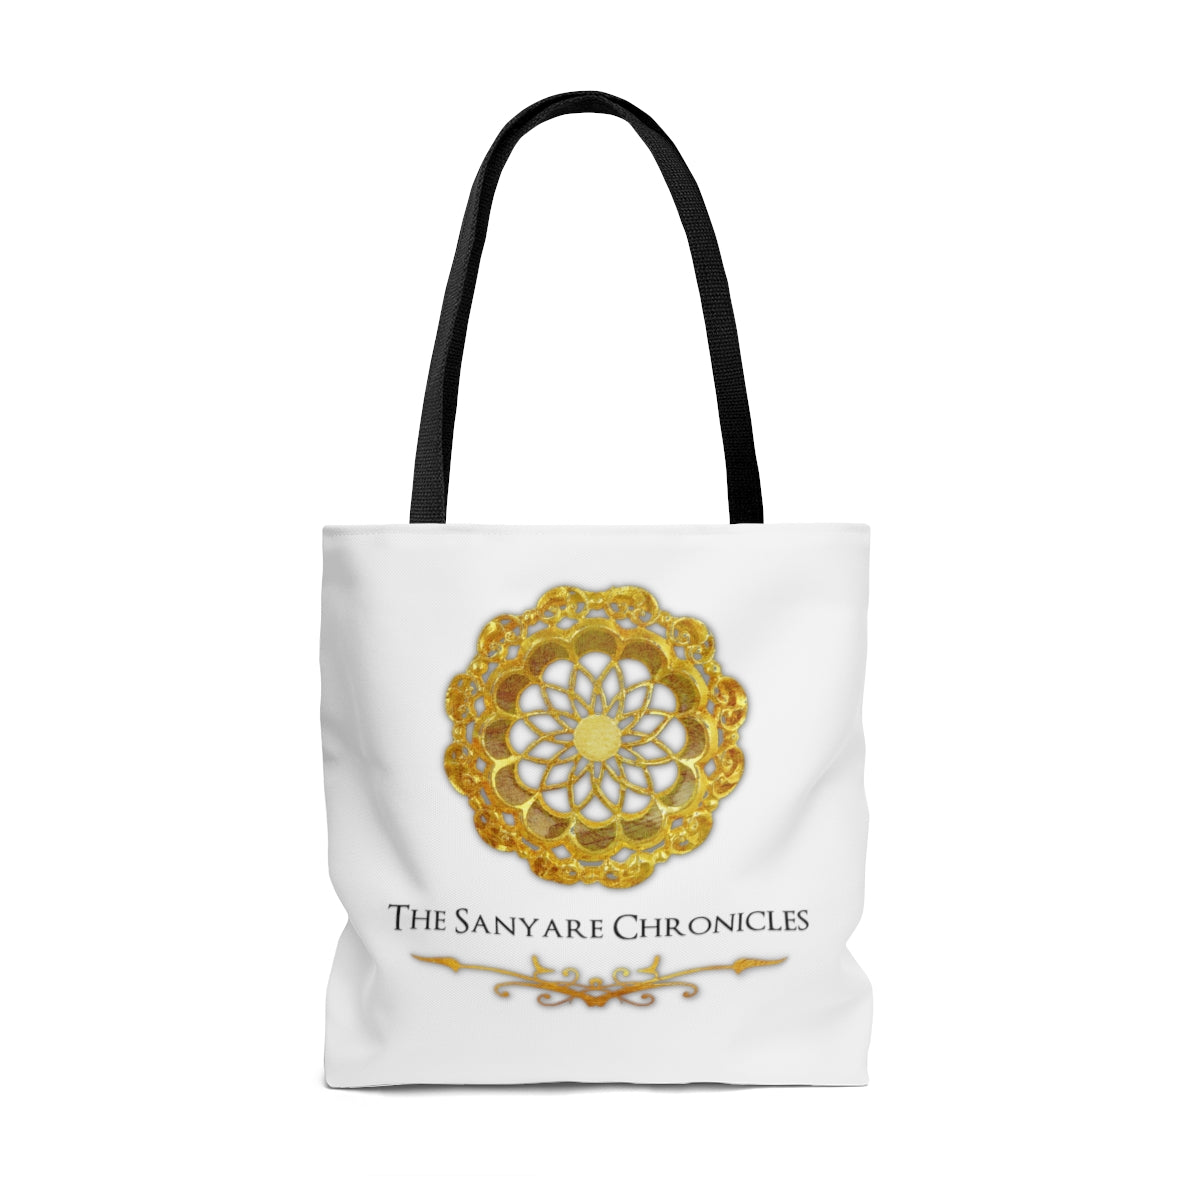 The Sanyare Chronicles Tote Bag